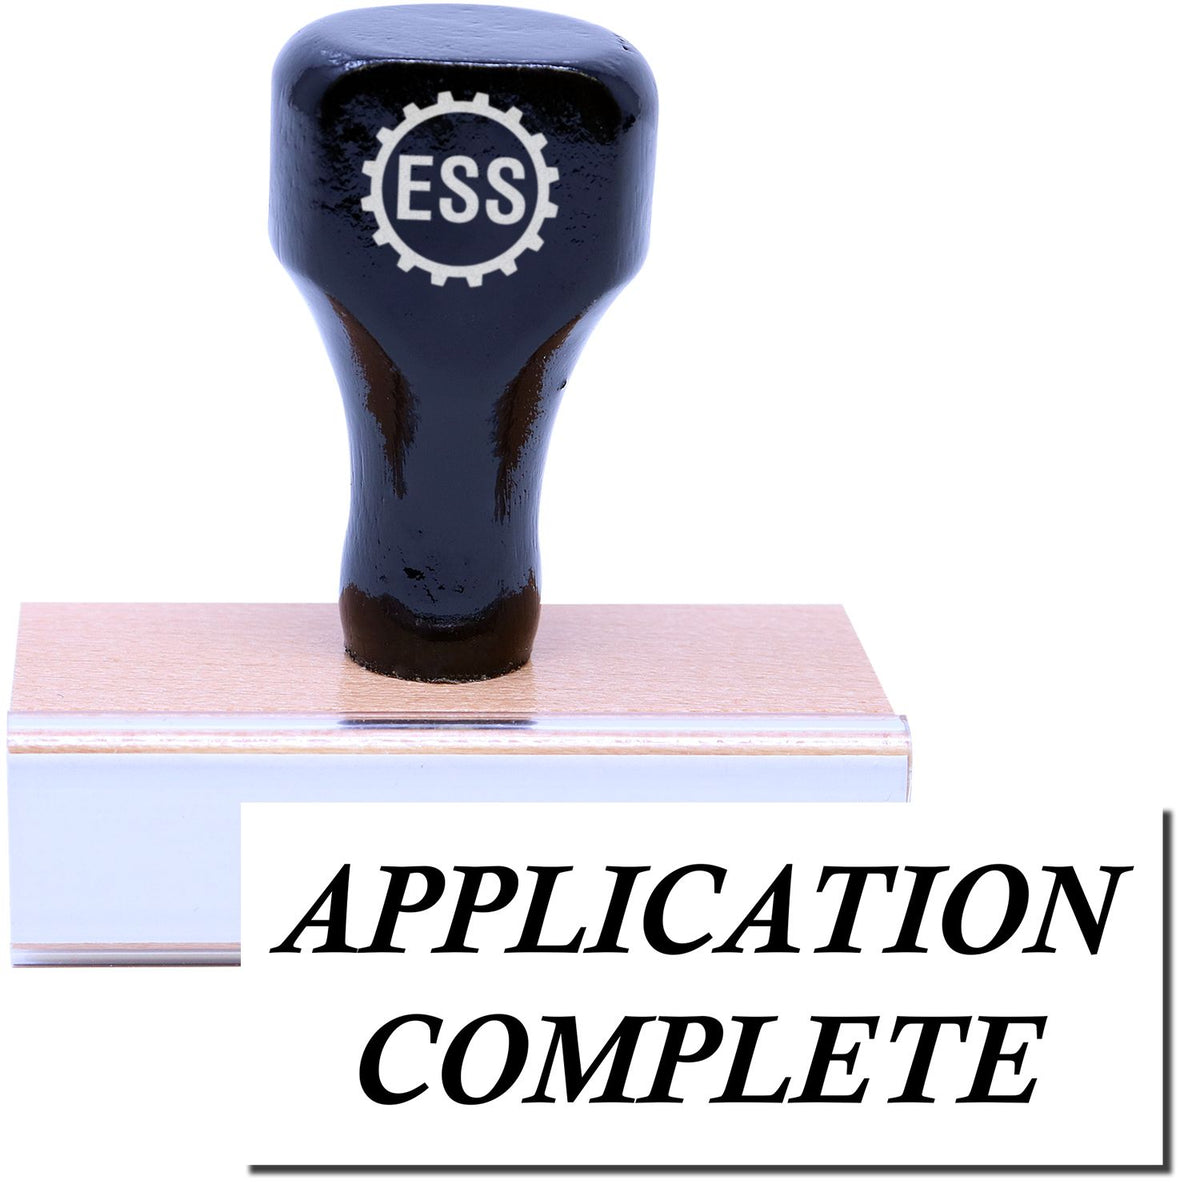 A stock office rubber stamp with a stamped image showing how the text &quot;APPLICATION COMPLETE&quot; in a large font is displayed after stamping.